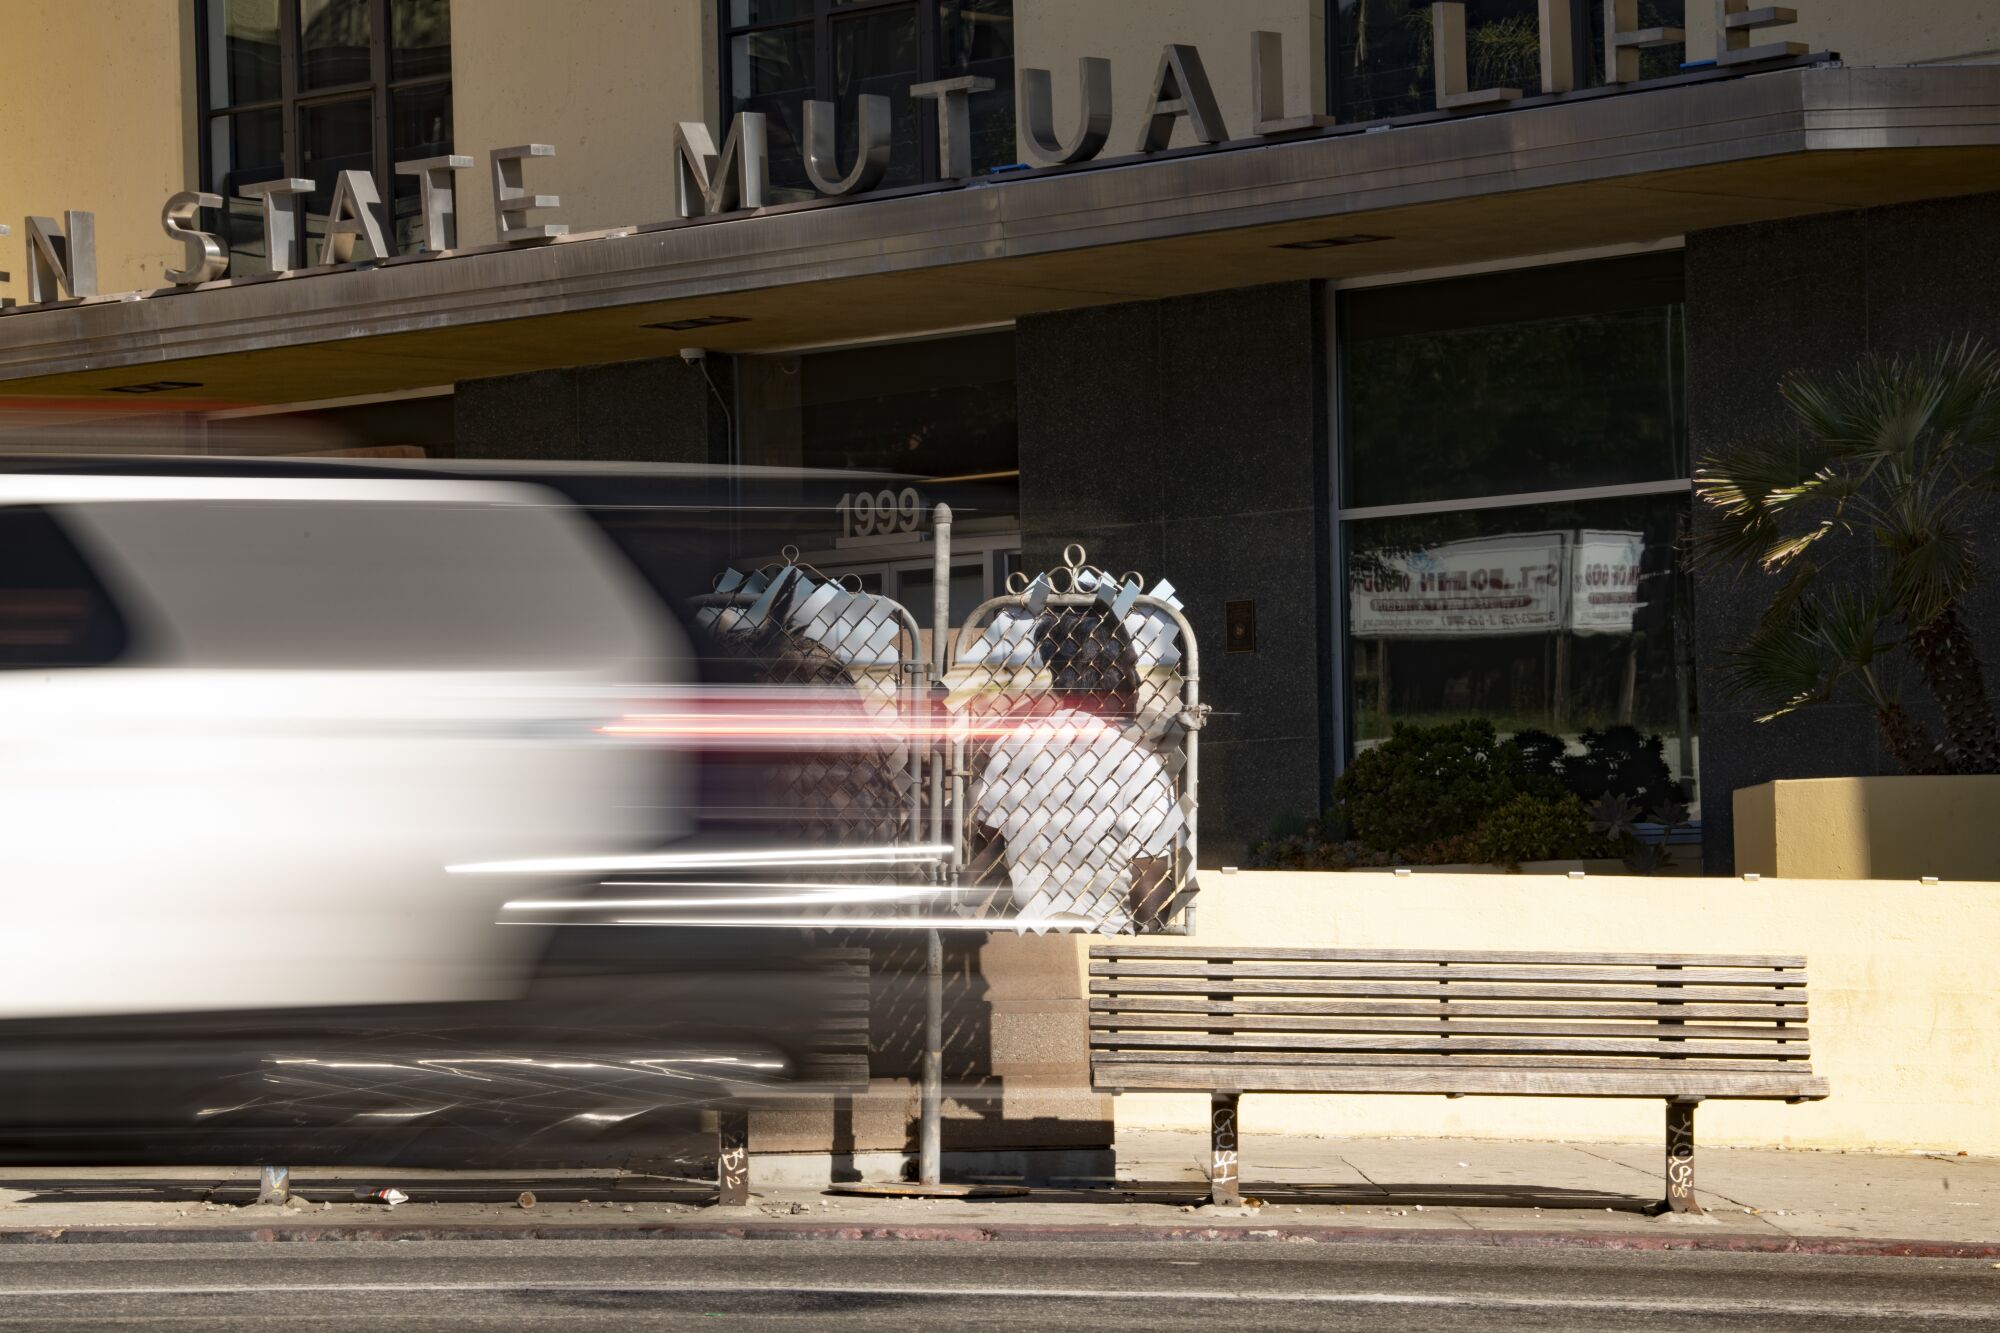 A blurred car passes by "Desert Totem (West Adams, California)" and the Golden State Mutual Life Insurance building.